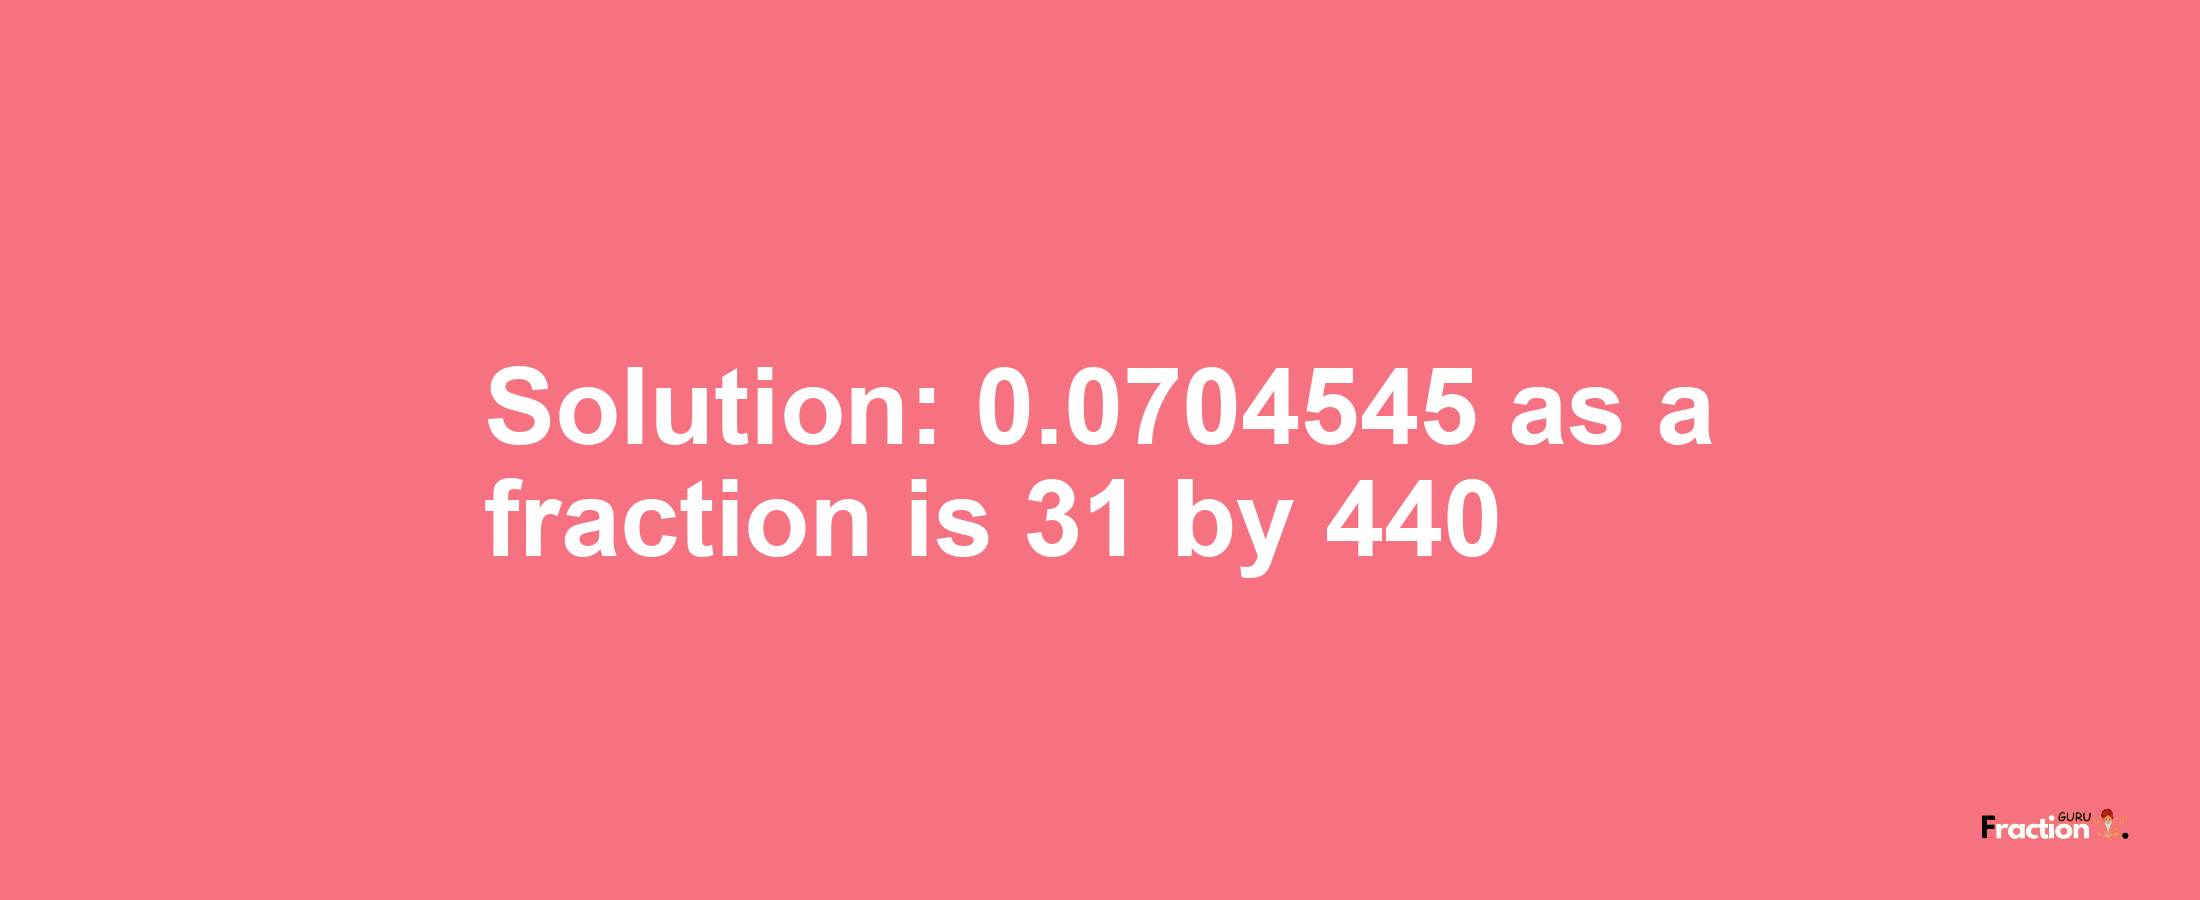 Solution:0.0704545 as a fraction is 31/440